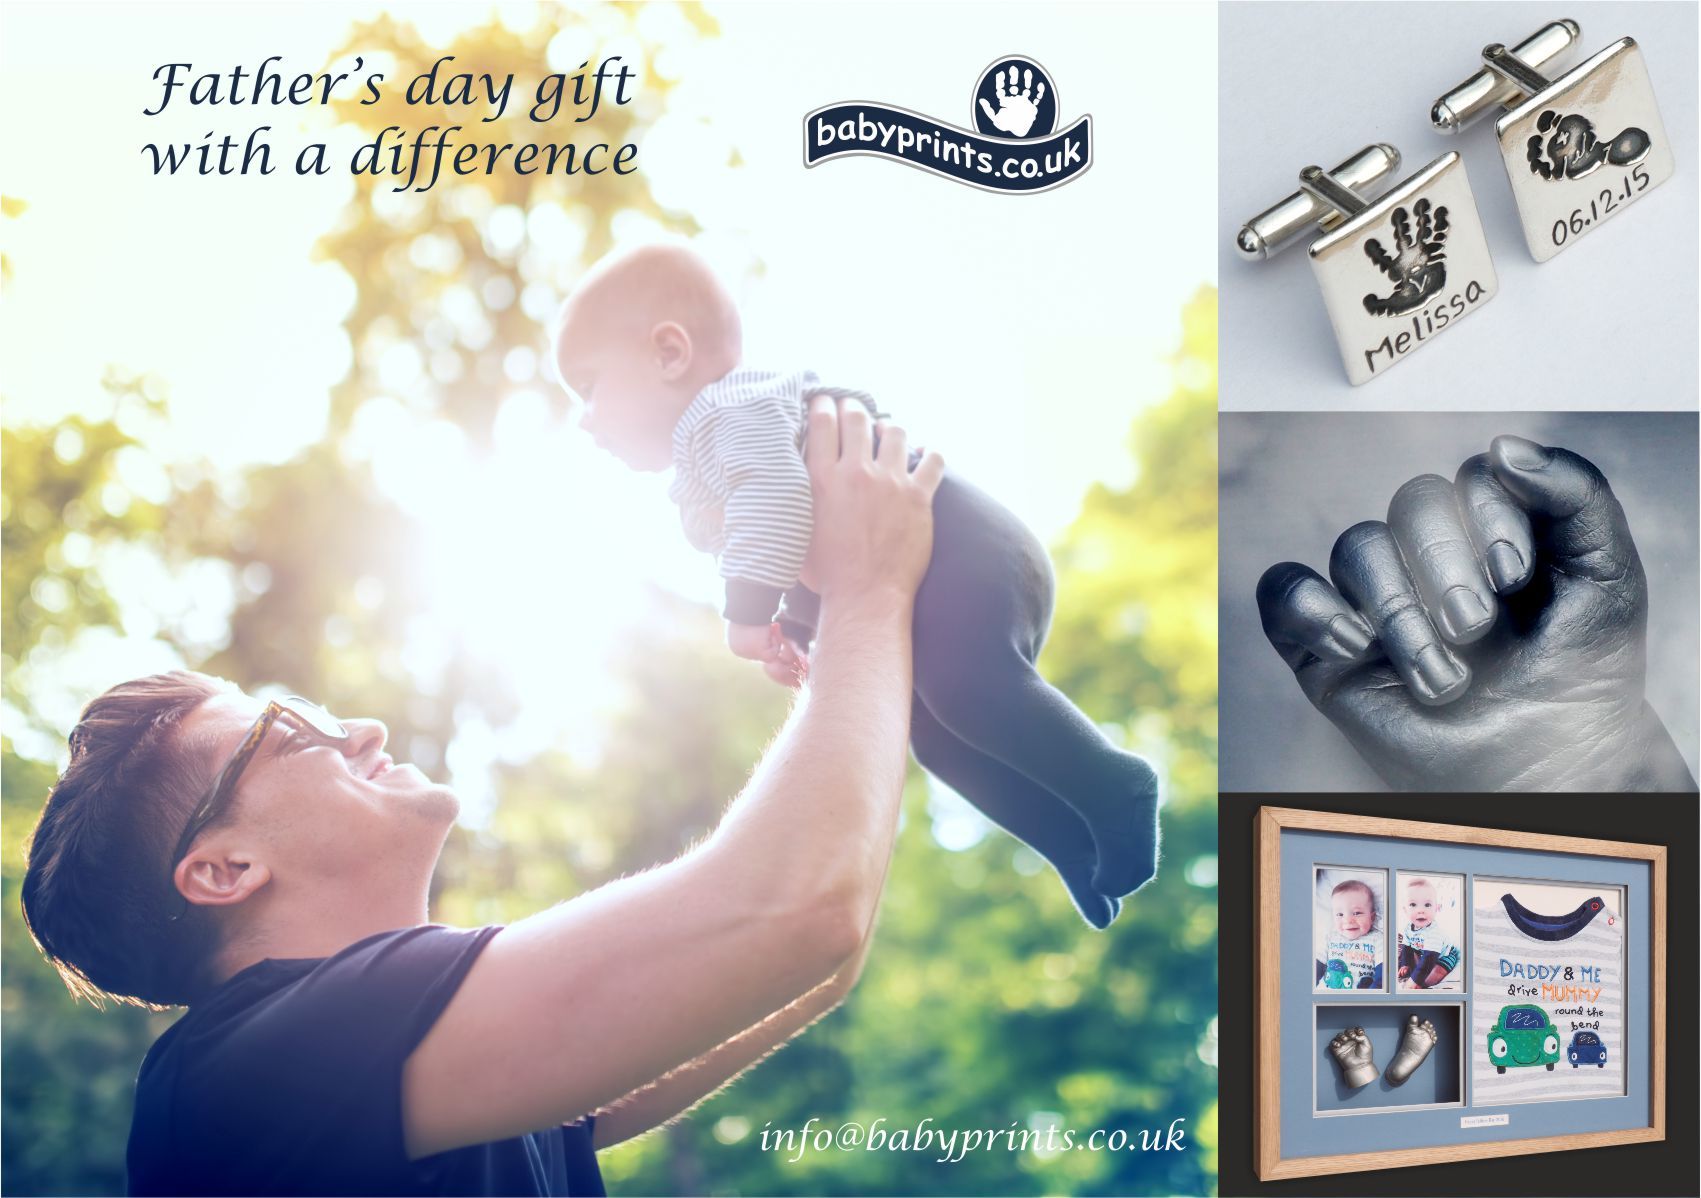 Father’s day gift with a difference